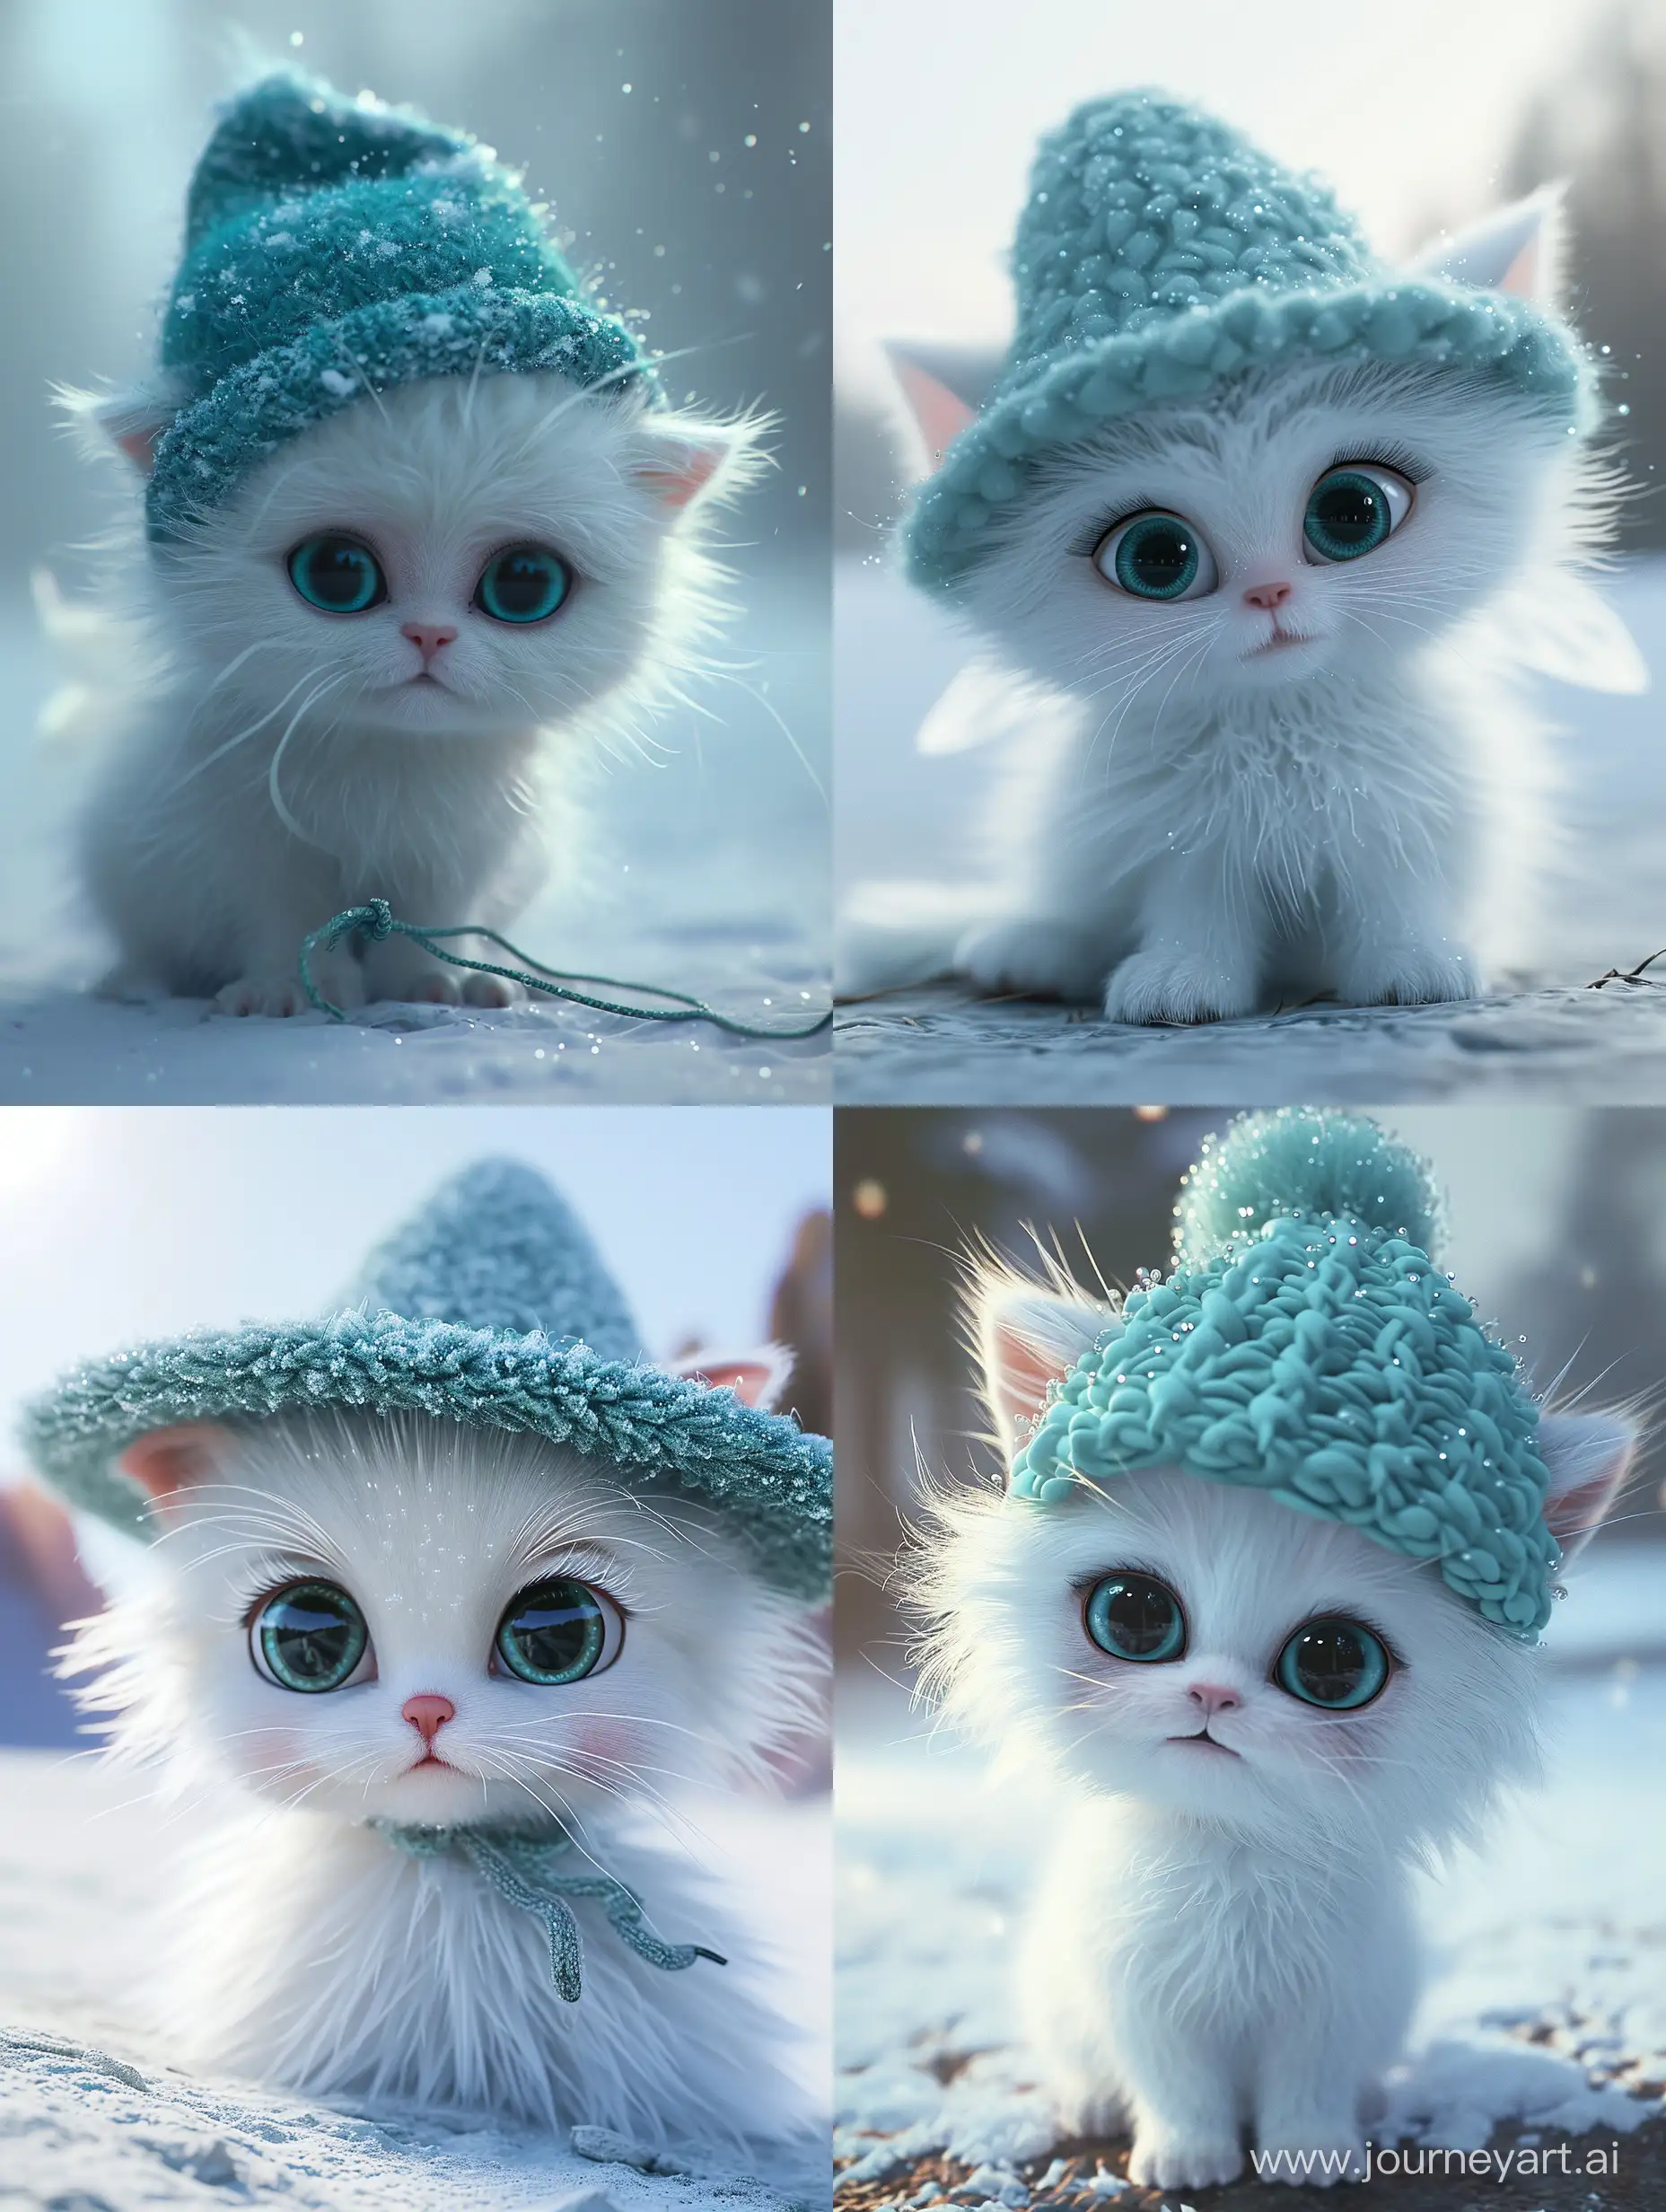 Adorable-Snowy-Winter-Scene-with-PixarStyle-Baby-Cat-in-a-Cyan-Hat